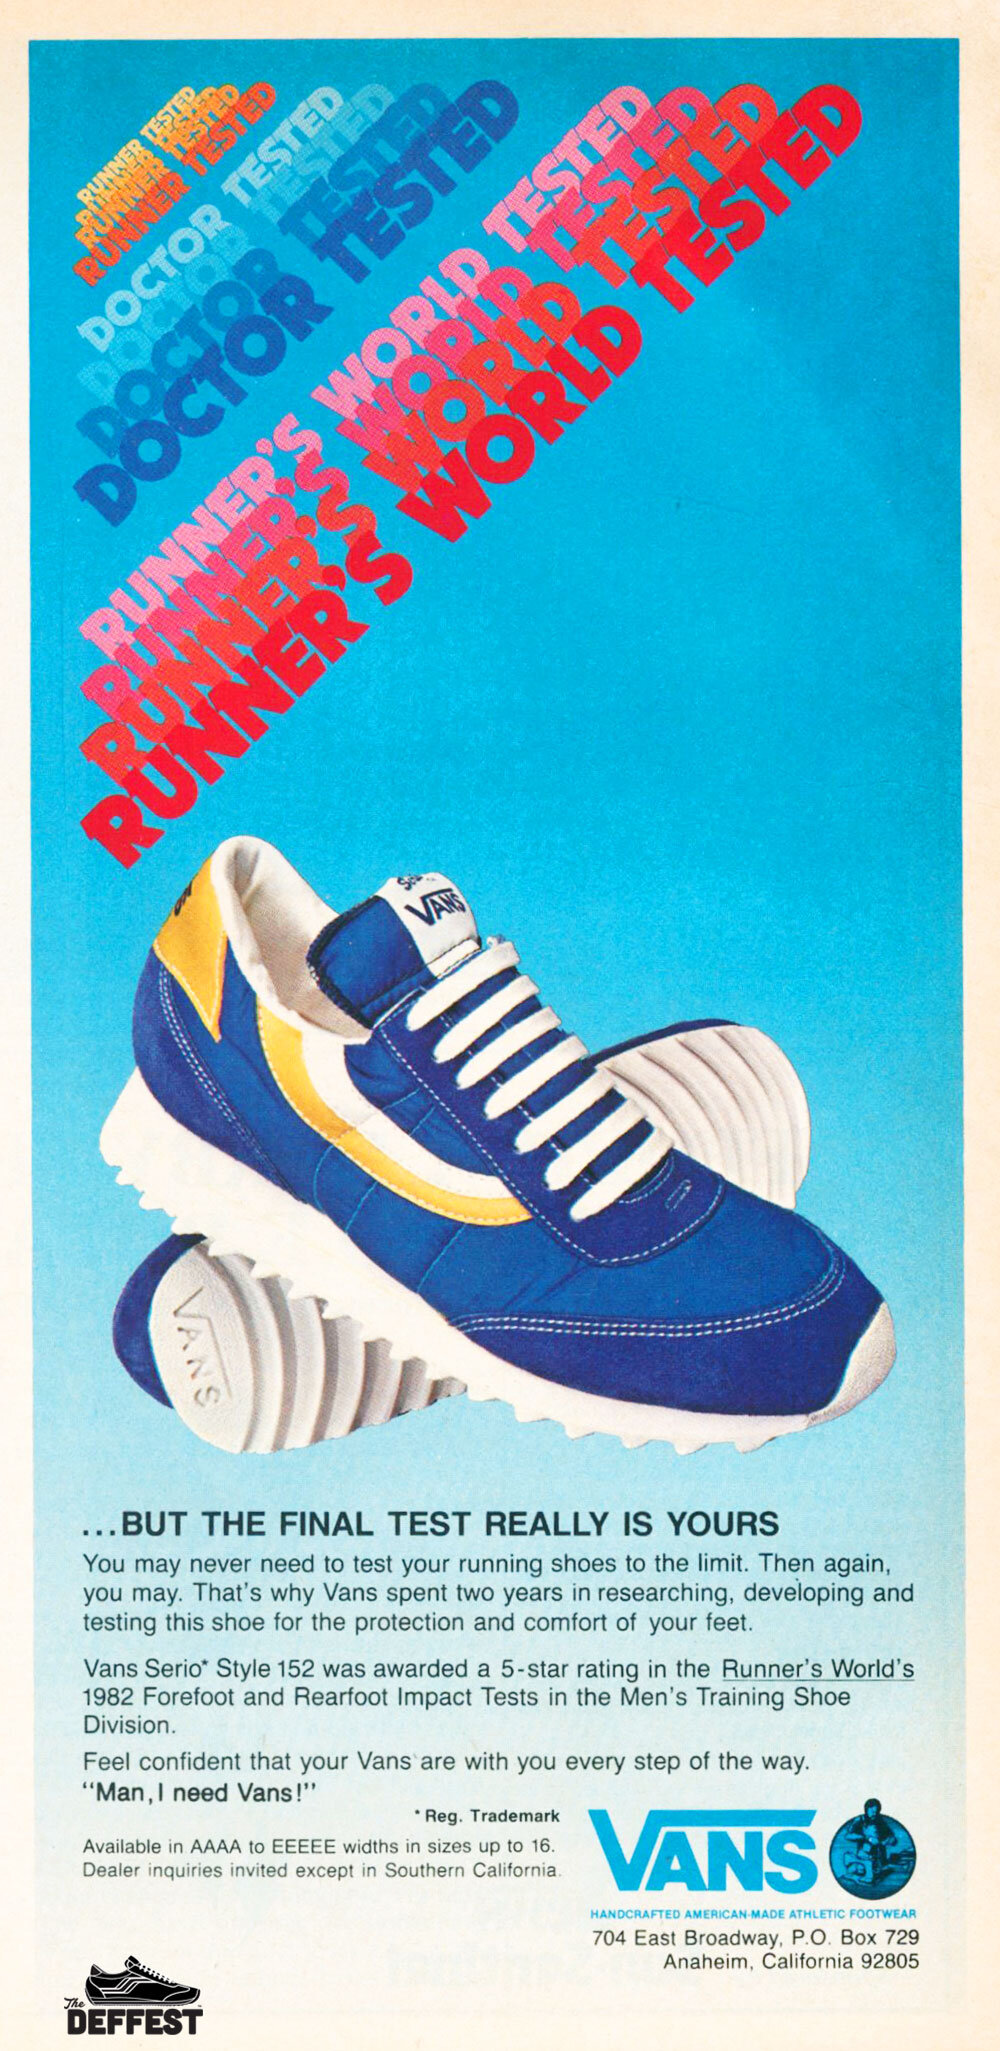 — The Deffest®. vintage and sneaker blog. — Ads